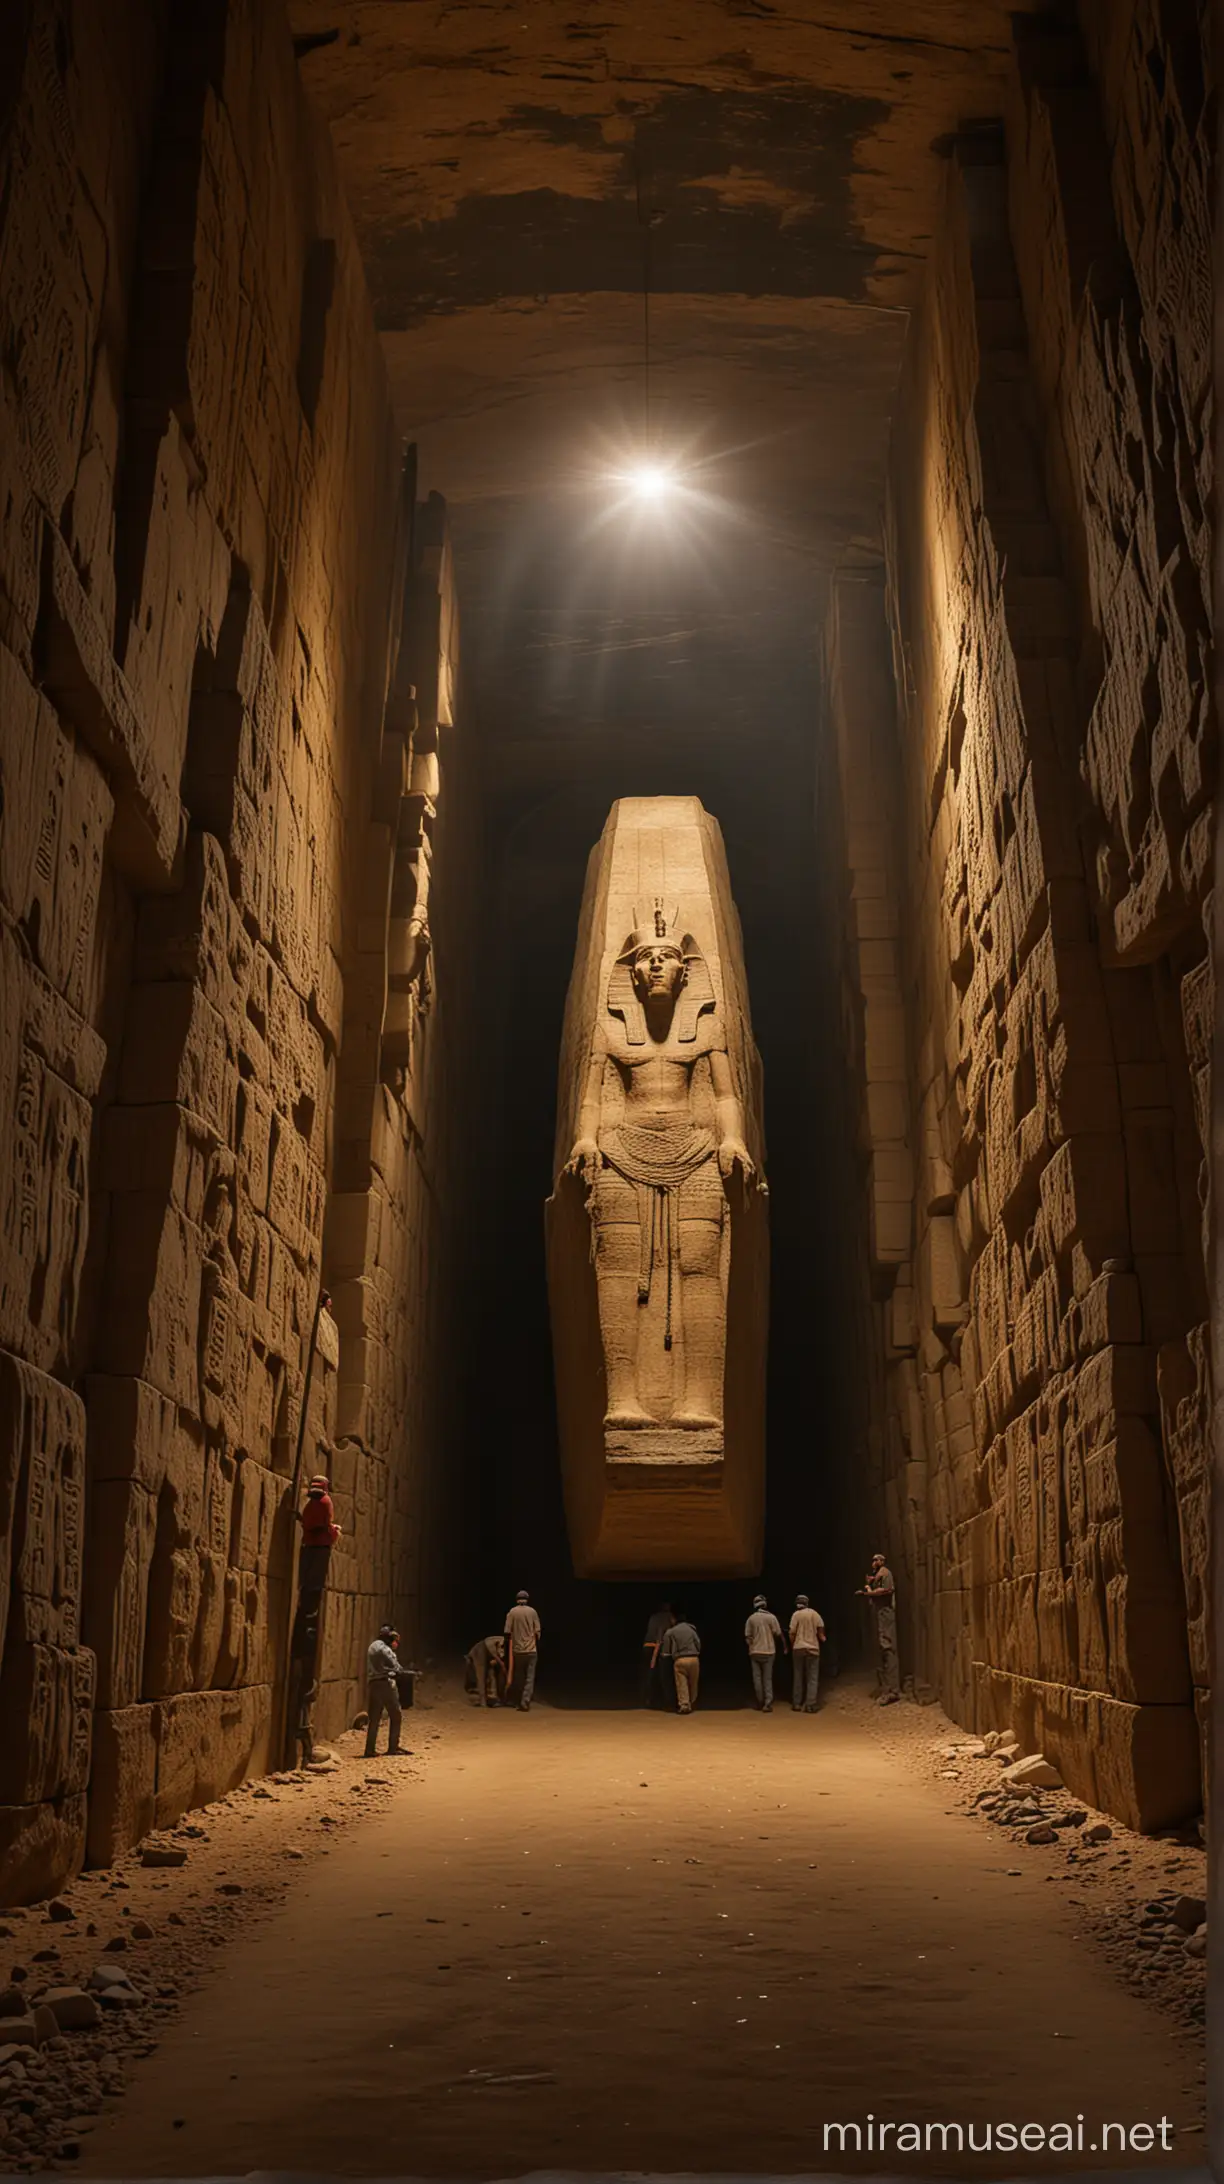 A hyper-realistic scene of a massive, 100-ton stone coffin being squeezed through a narrow, dimly lit tunnel in an ancient Egyptian tomb. Workers strain to pull it on rollers, sweat dripping from their brows.
